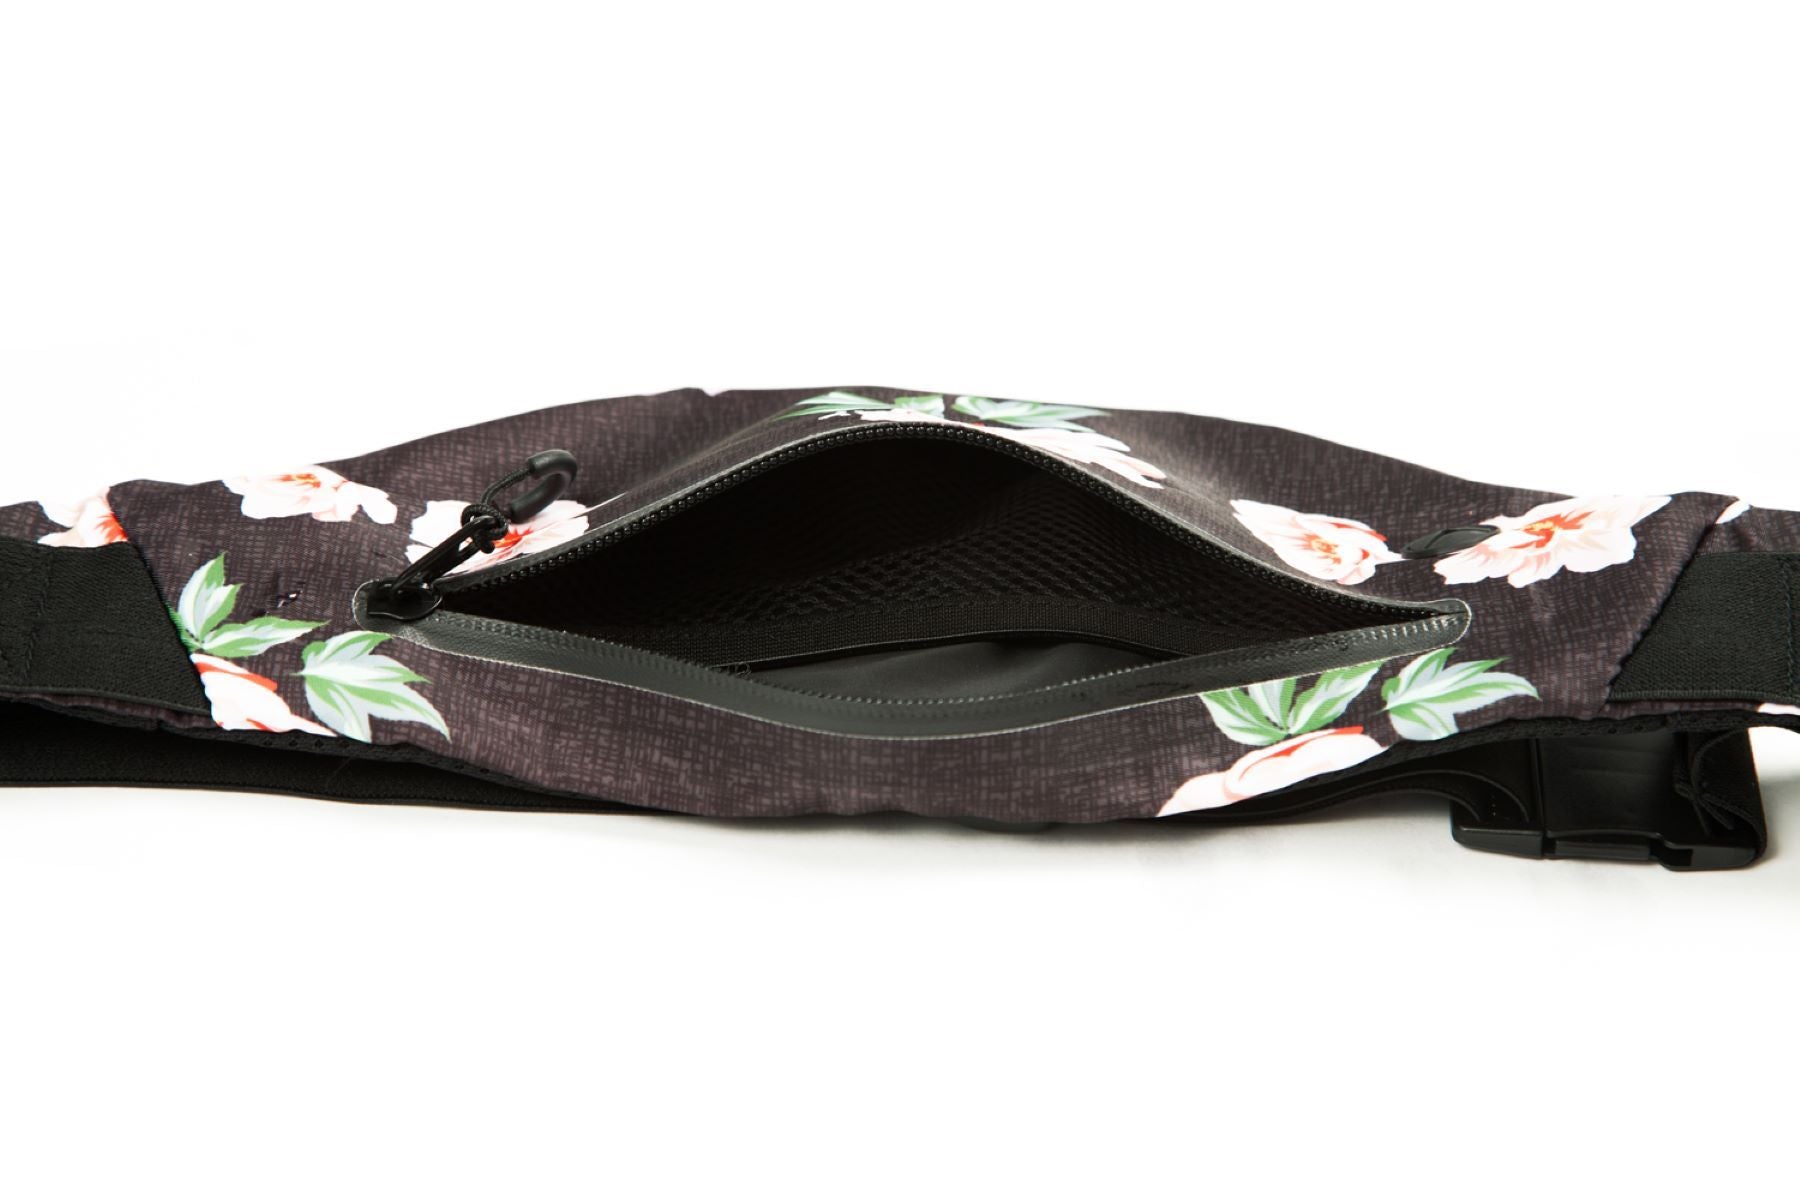 Vooray Active Fanny Pack